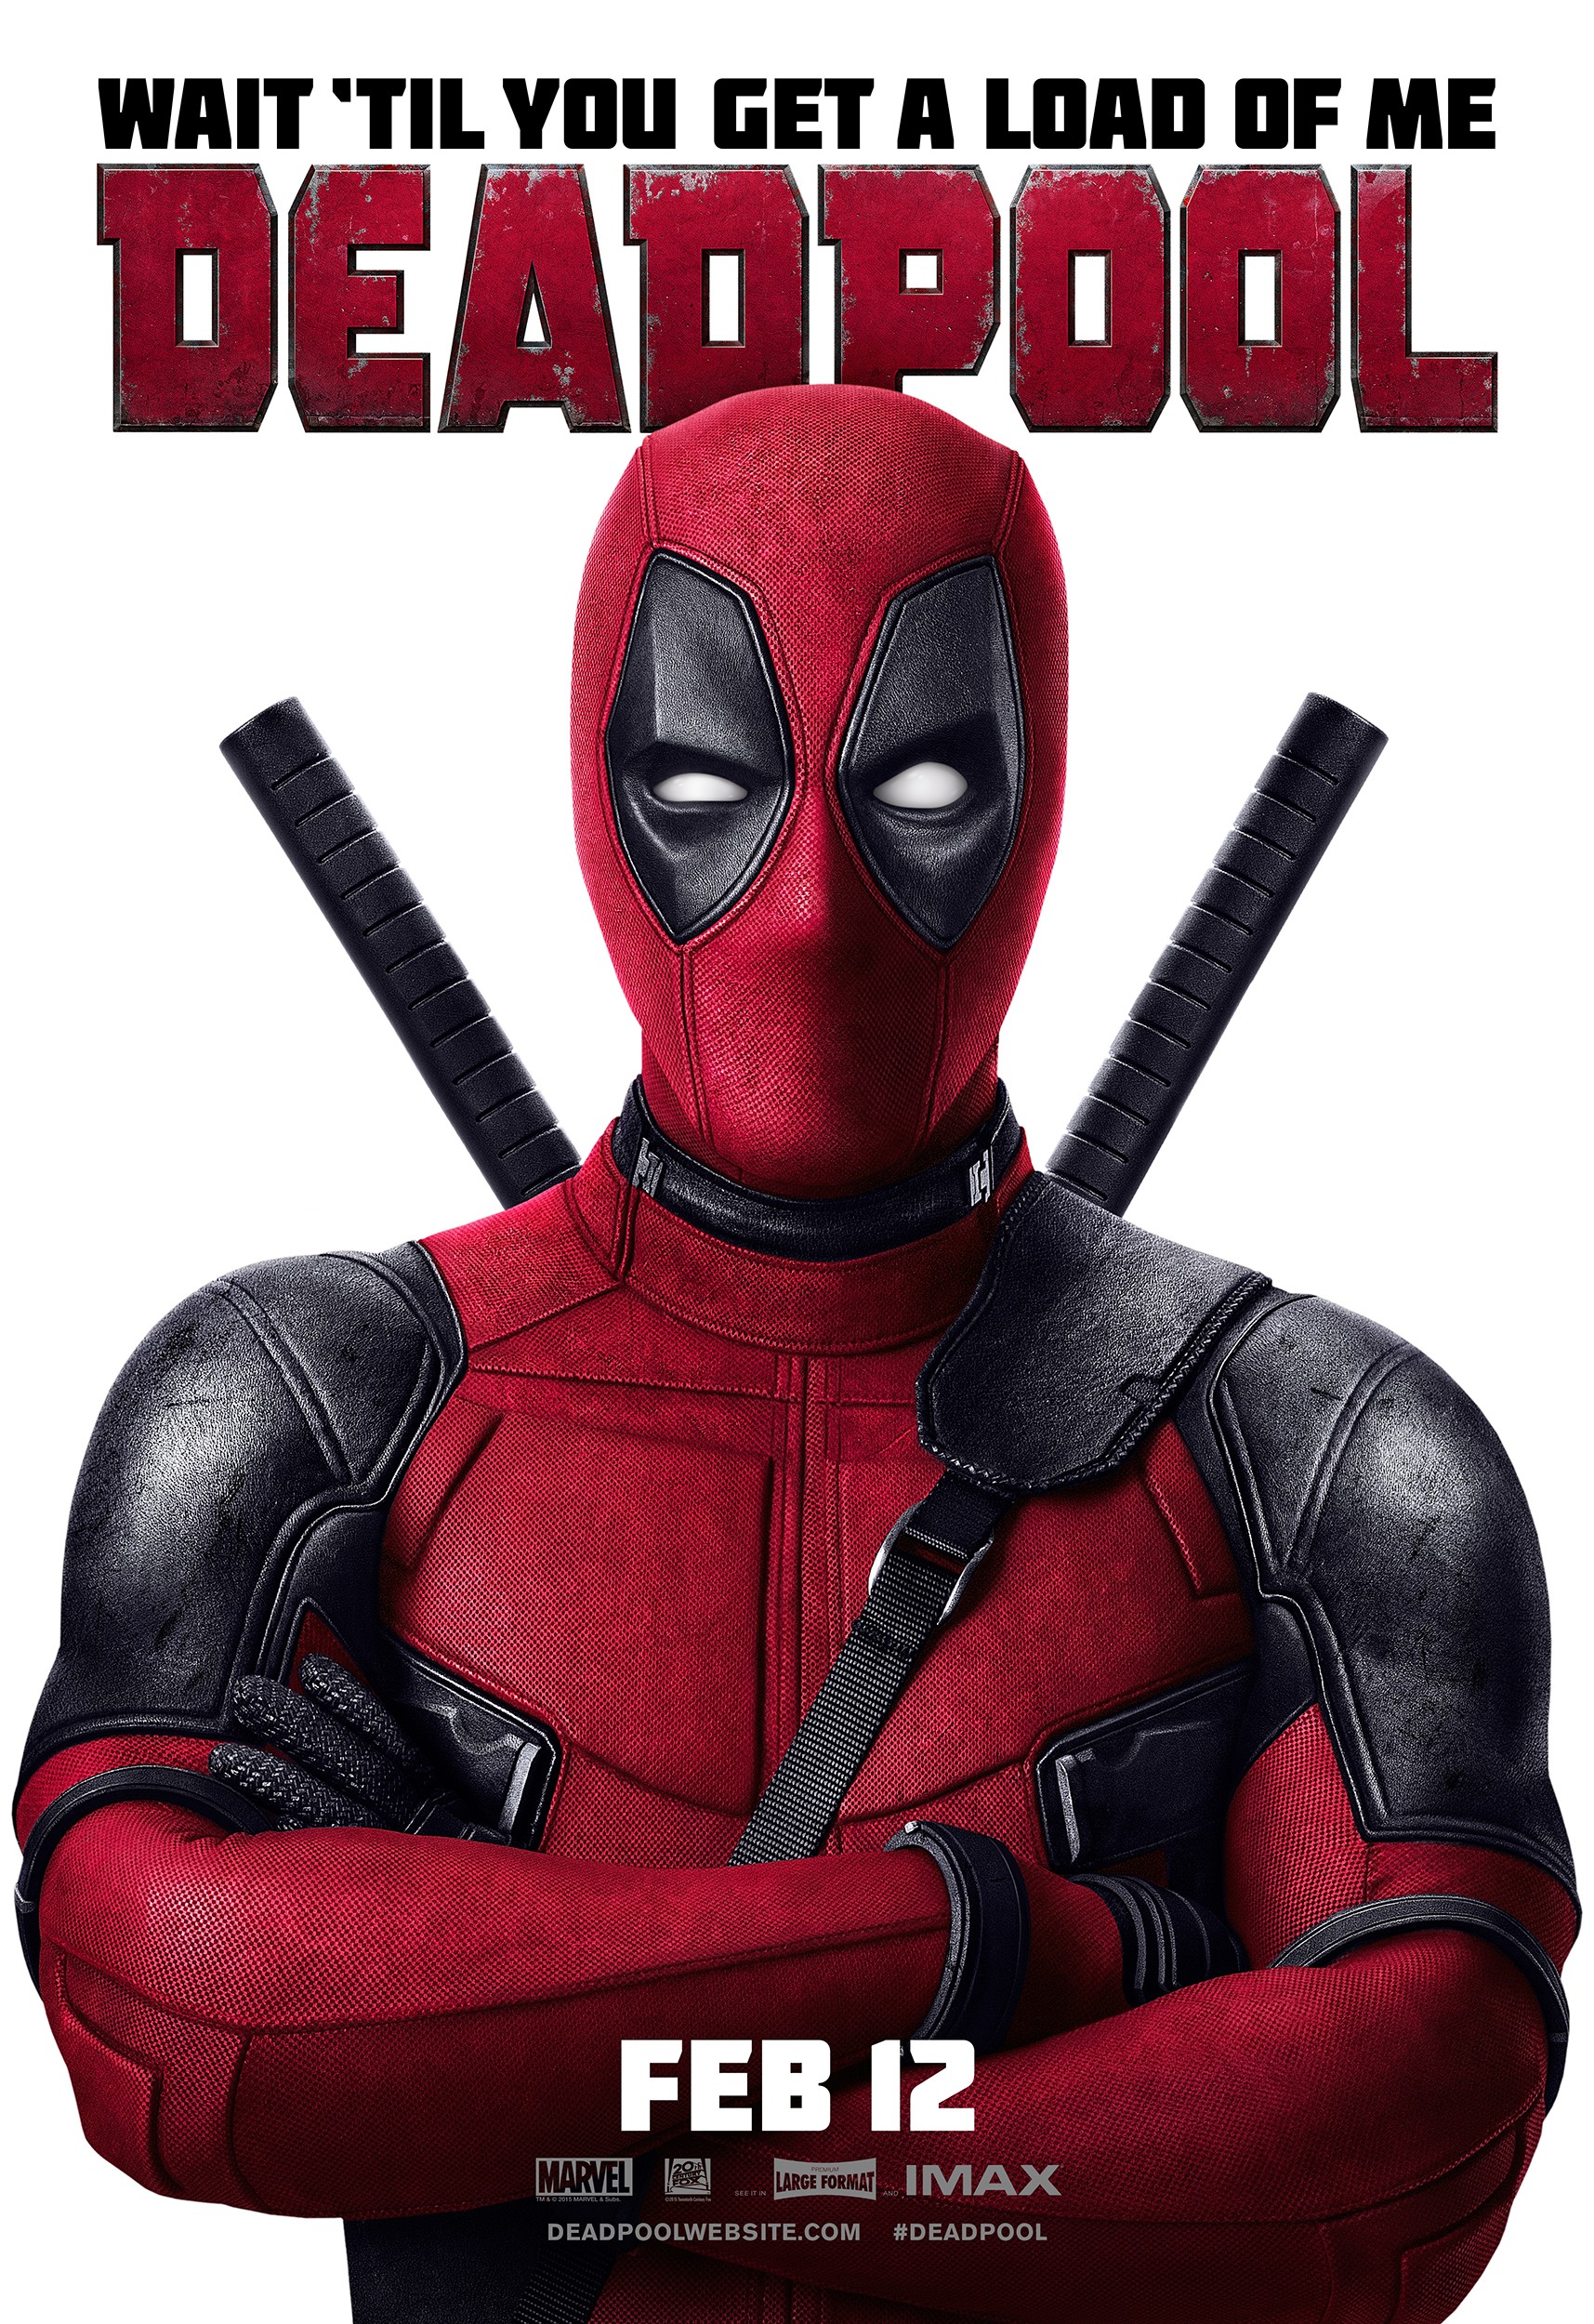 Mega Sized Movie Poster Image for Deadpool (#10 of 15)